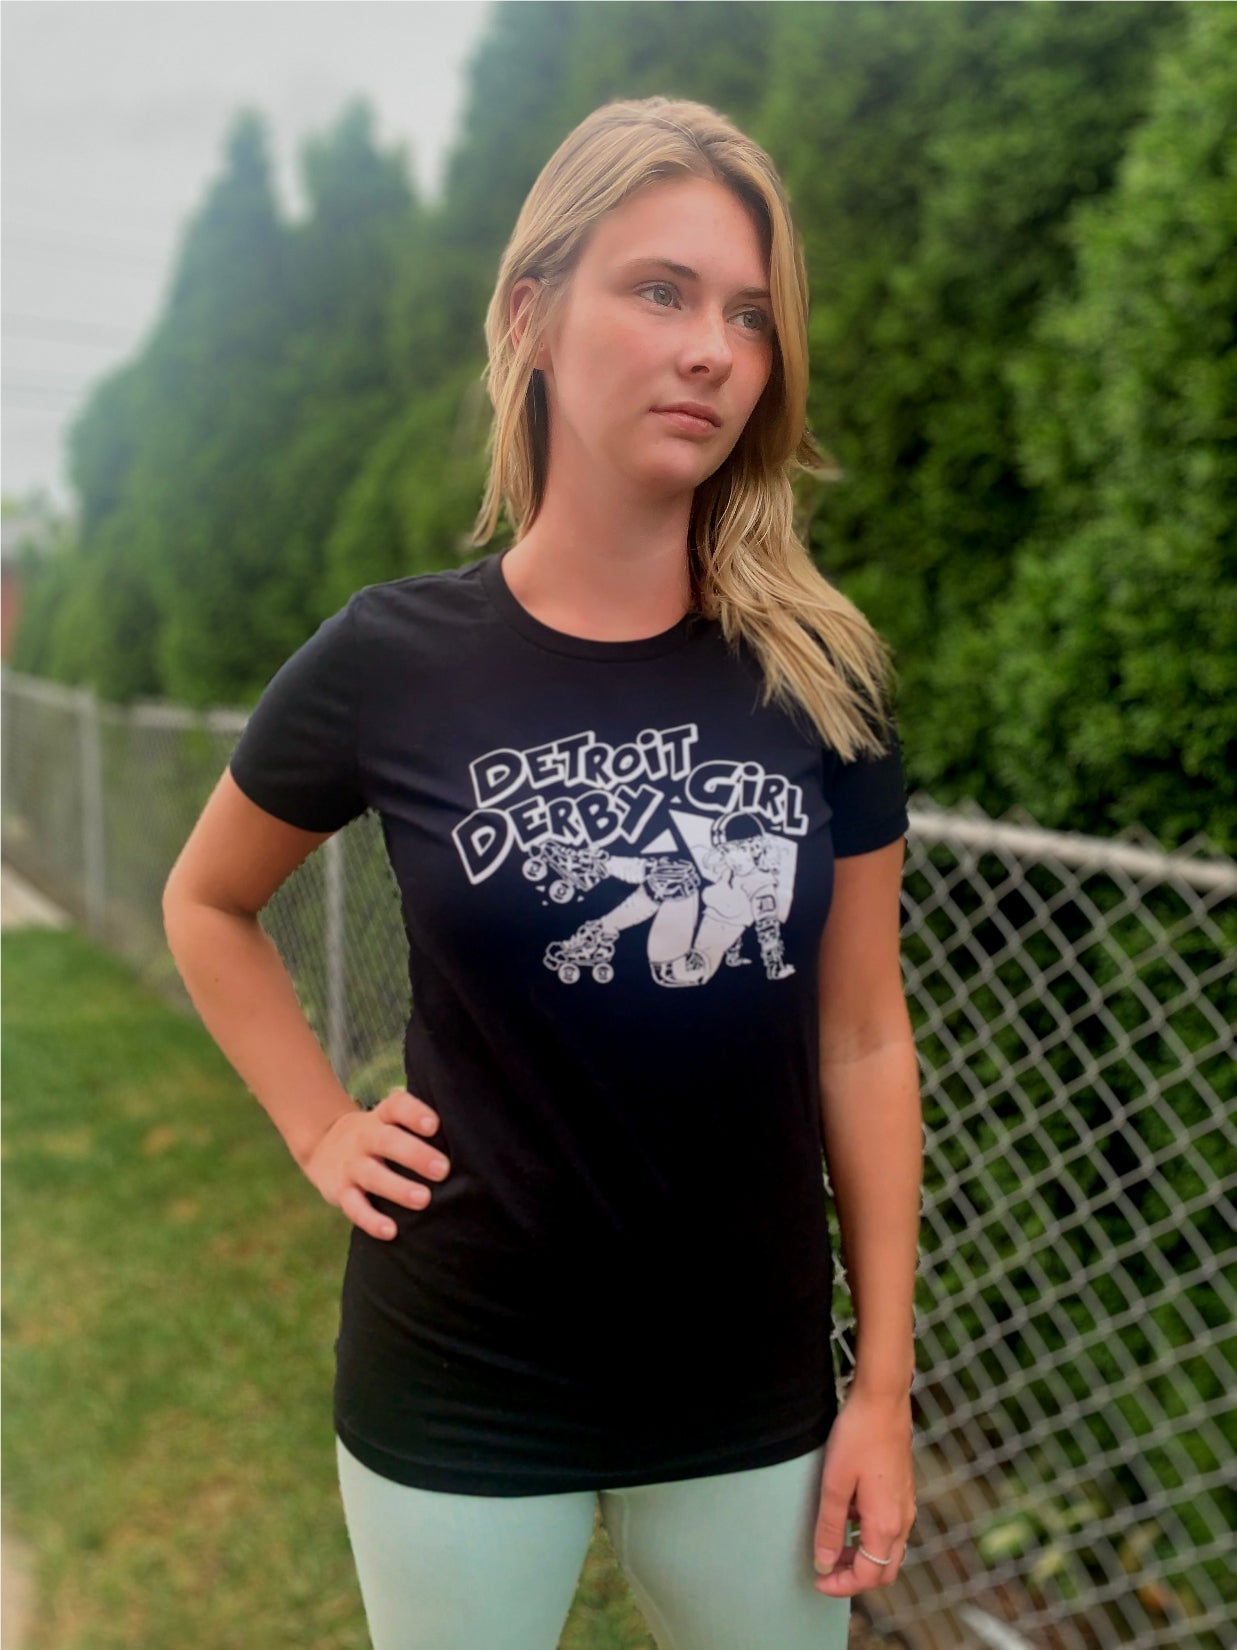 Derby Girls Fitted T- Shirt L / Black by lostinsounddetroit